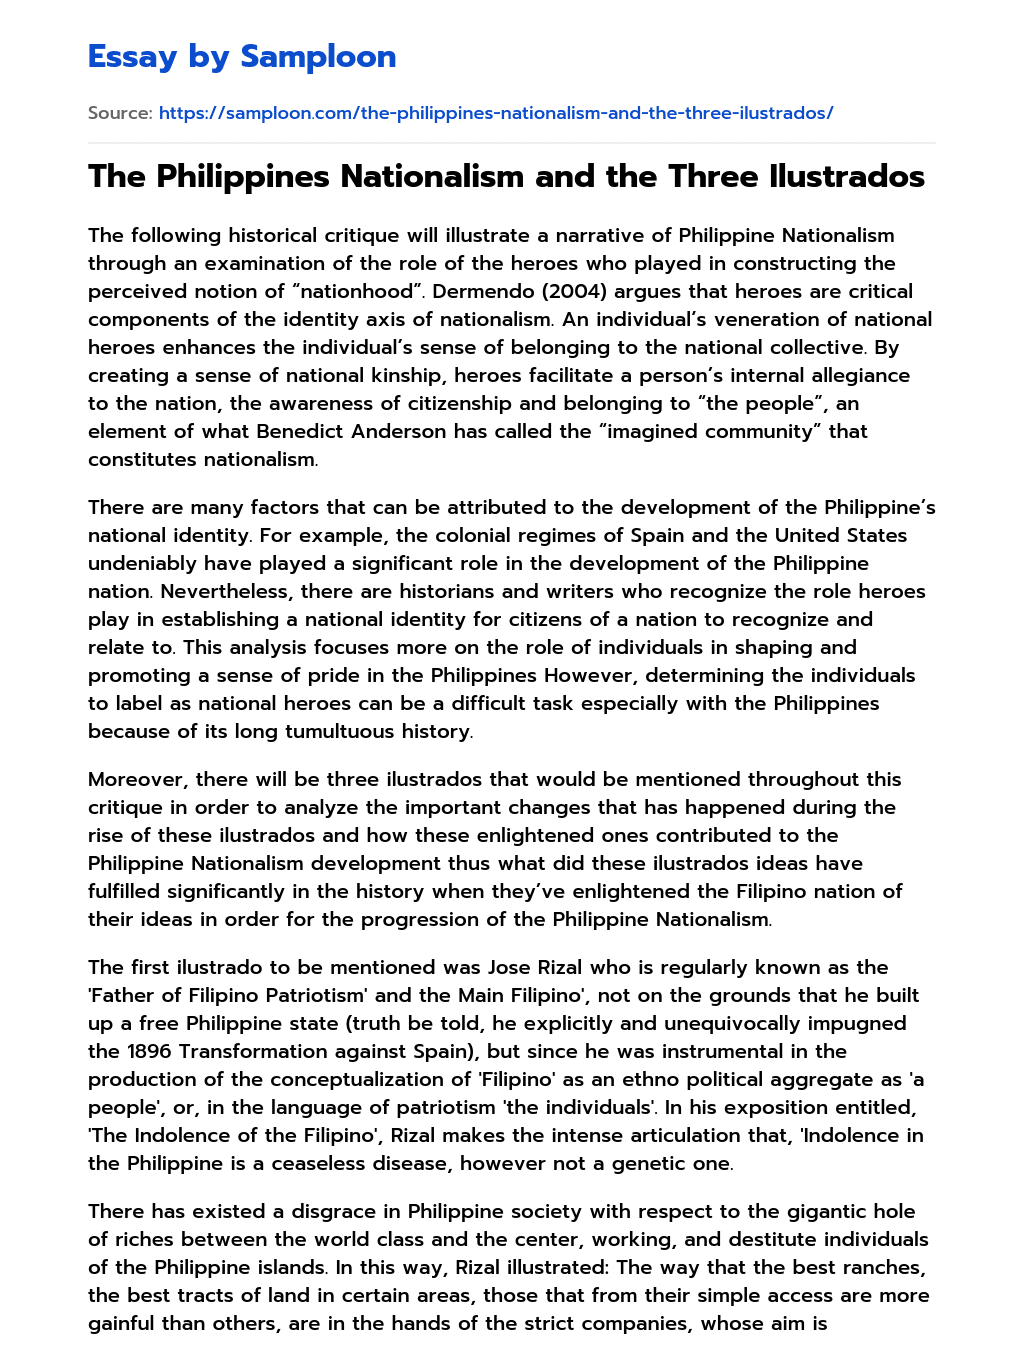 The Philippines Nationalism and the Three Ilustrados essay